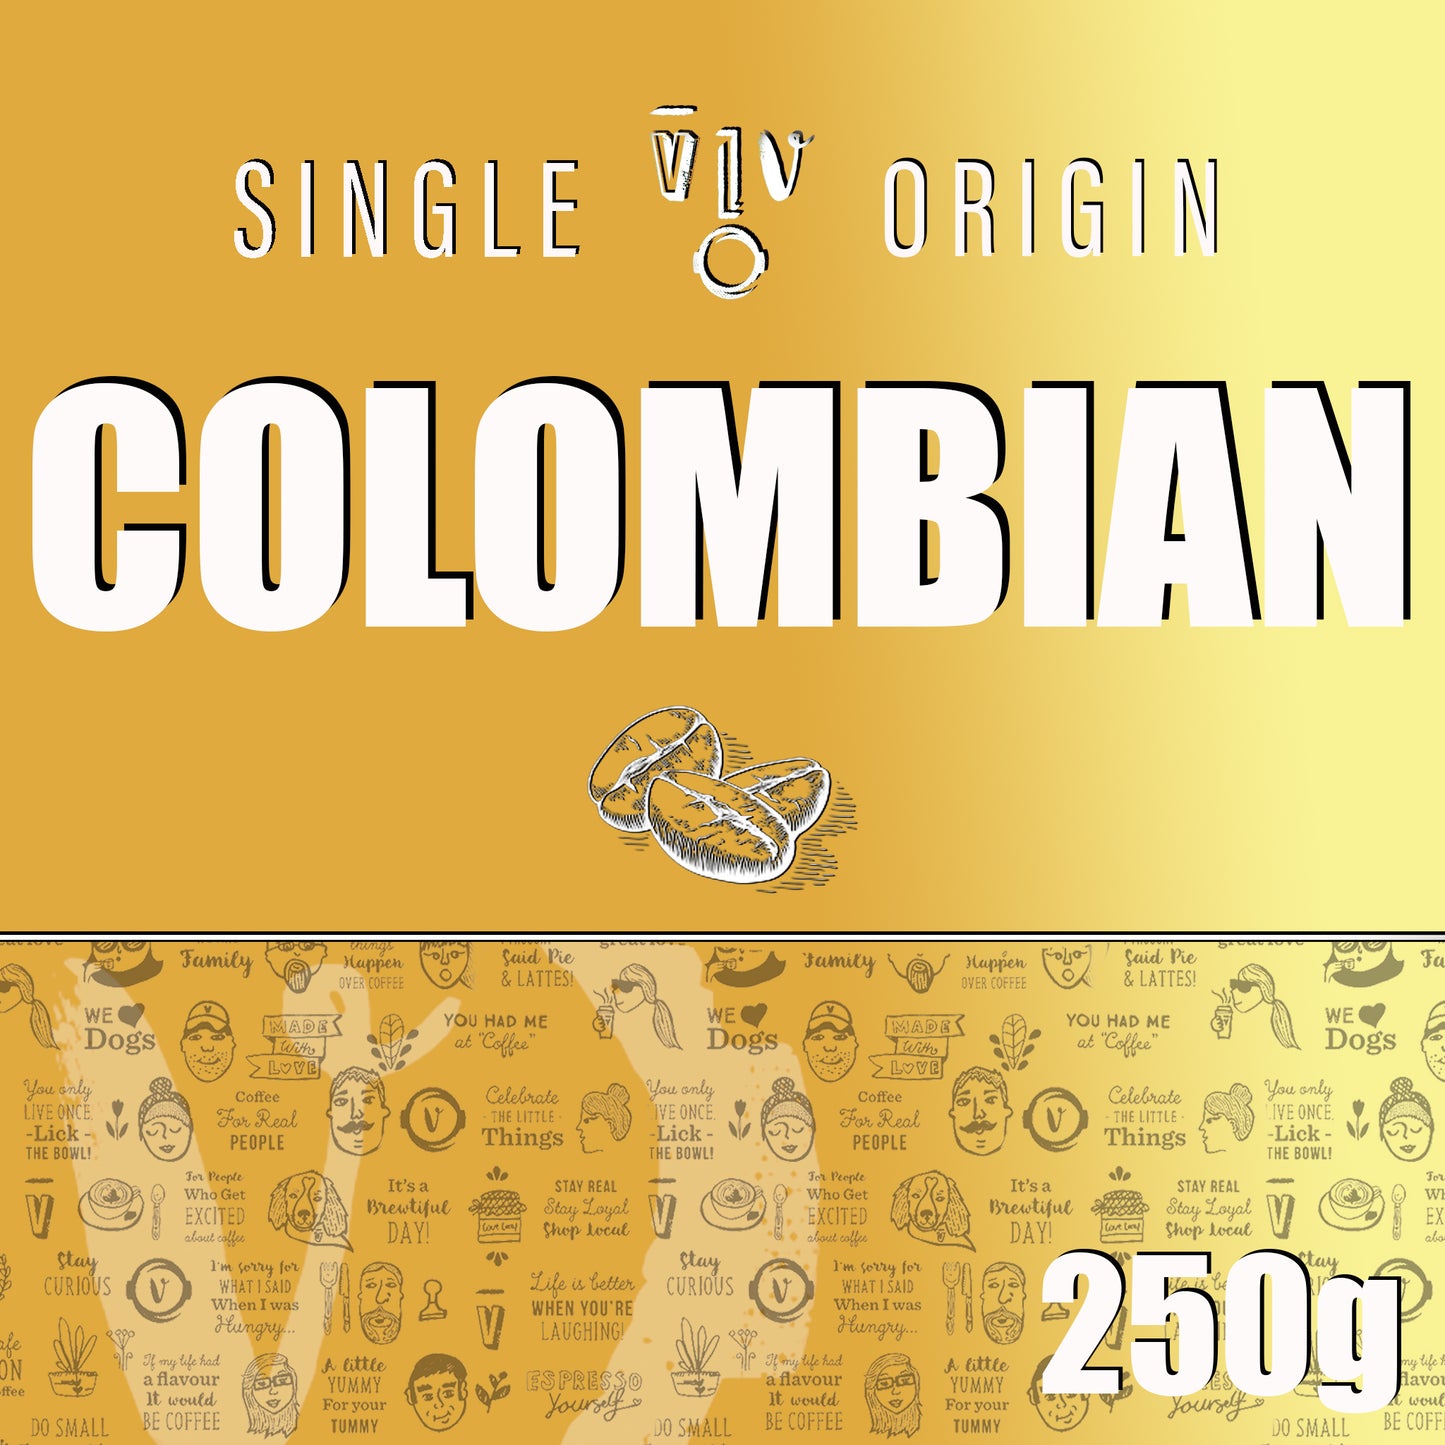 250g COLOMBIAN Beans | Resealable KRAFT Pouch (VC)